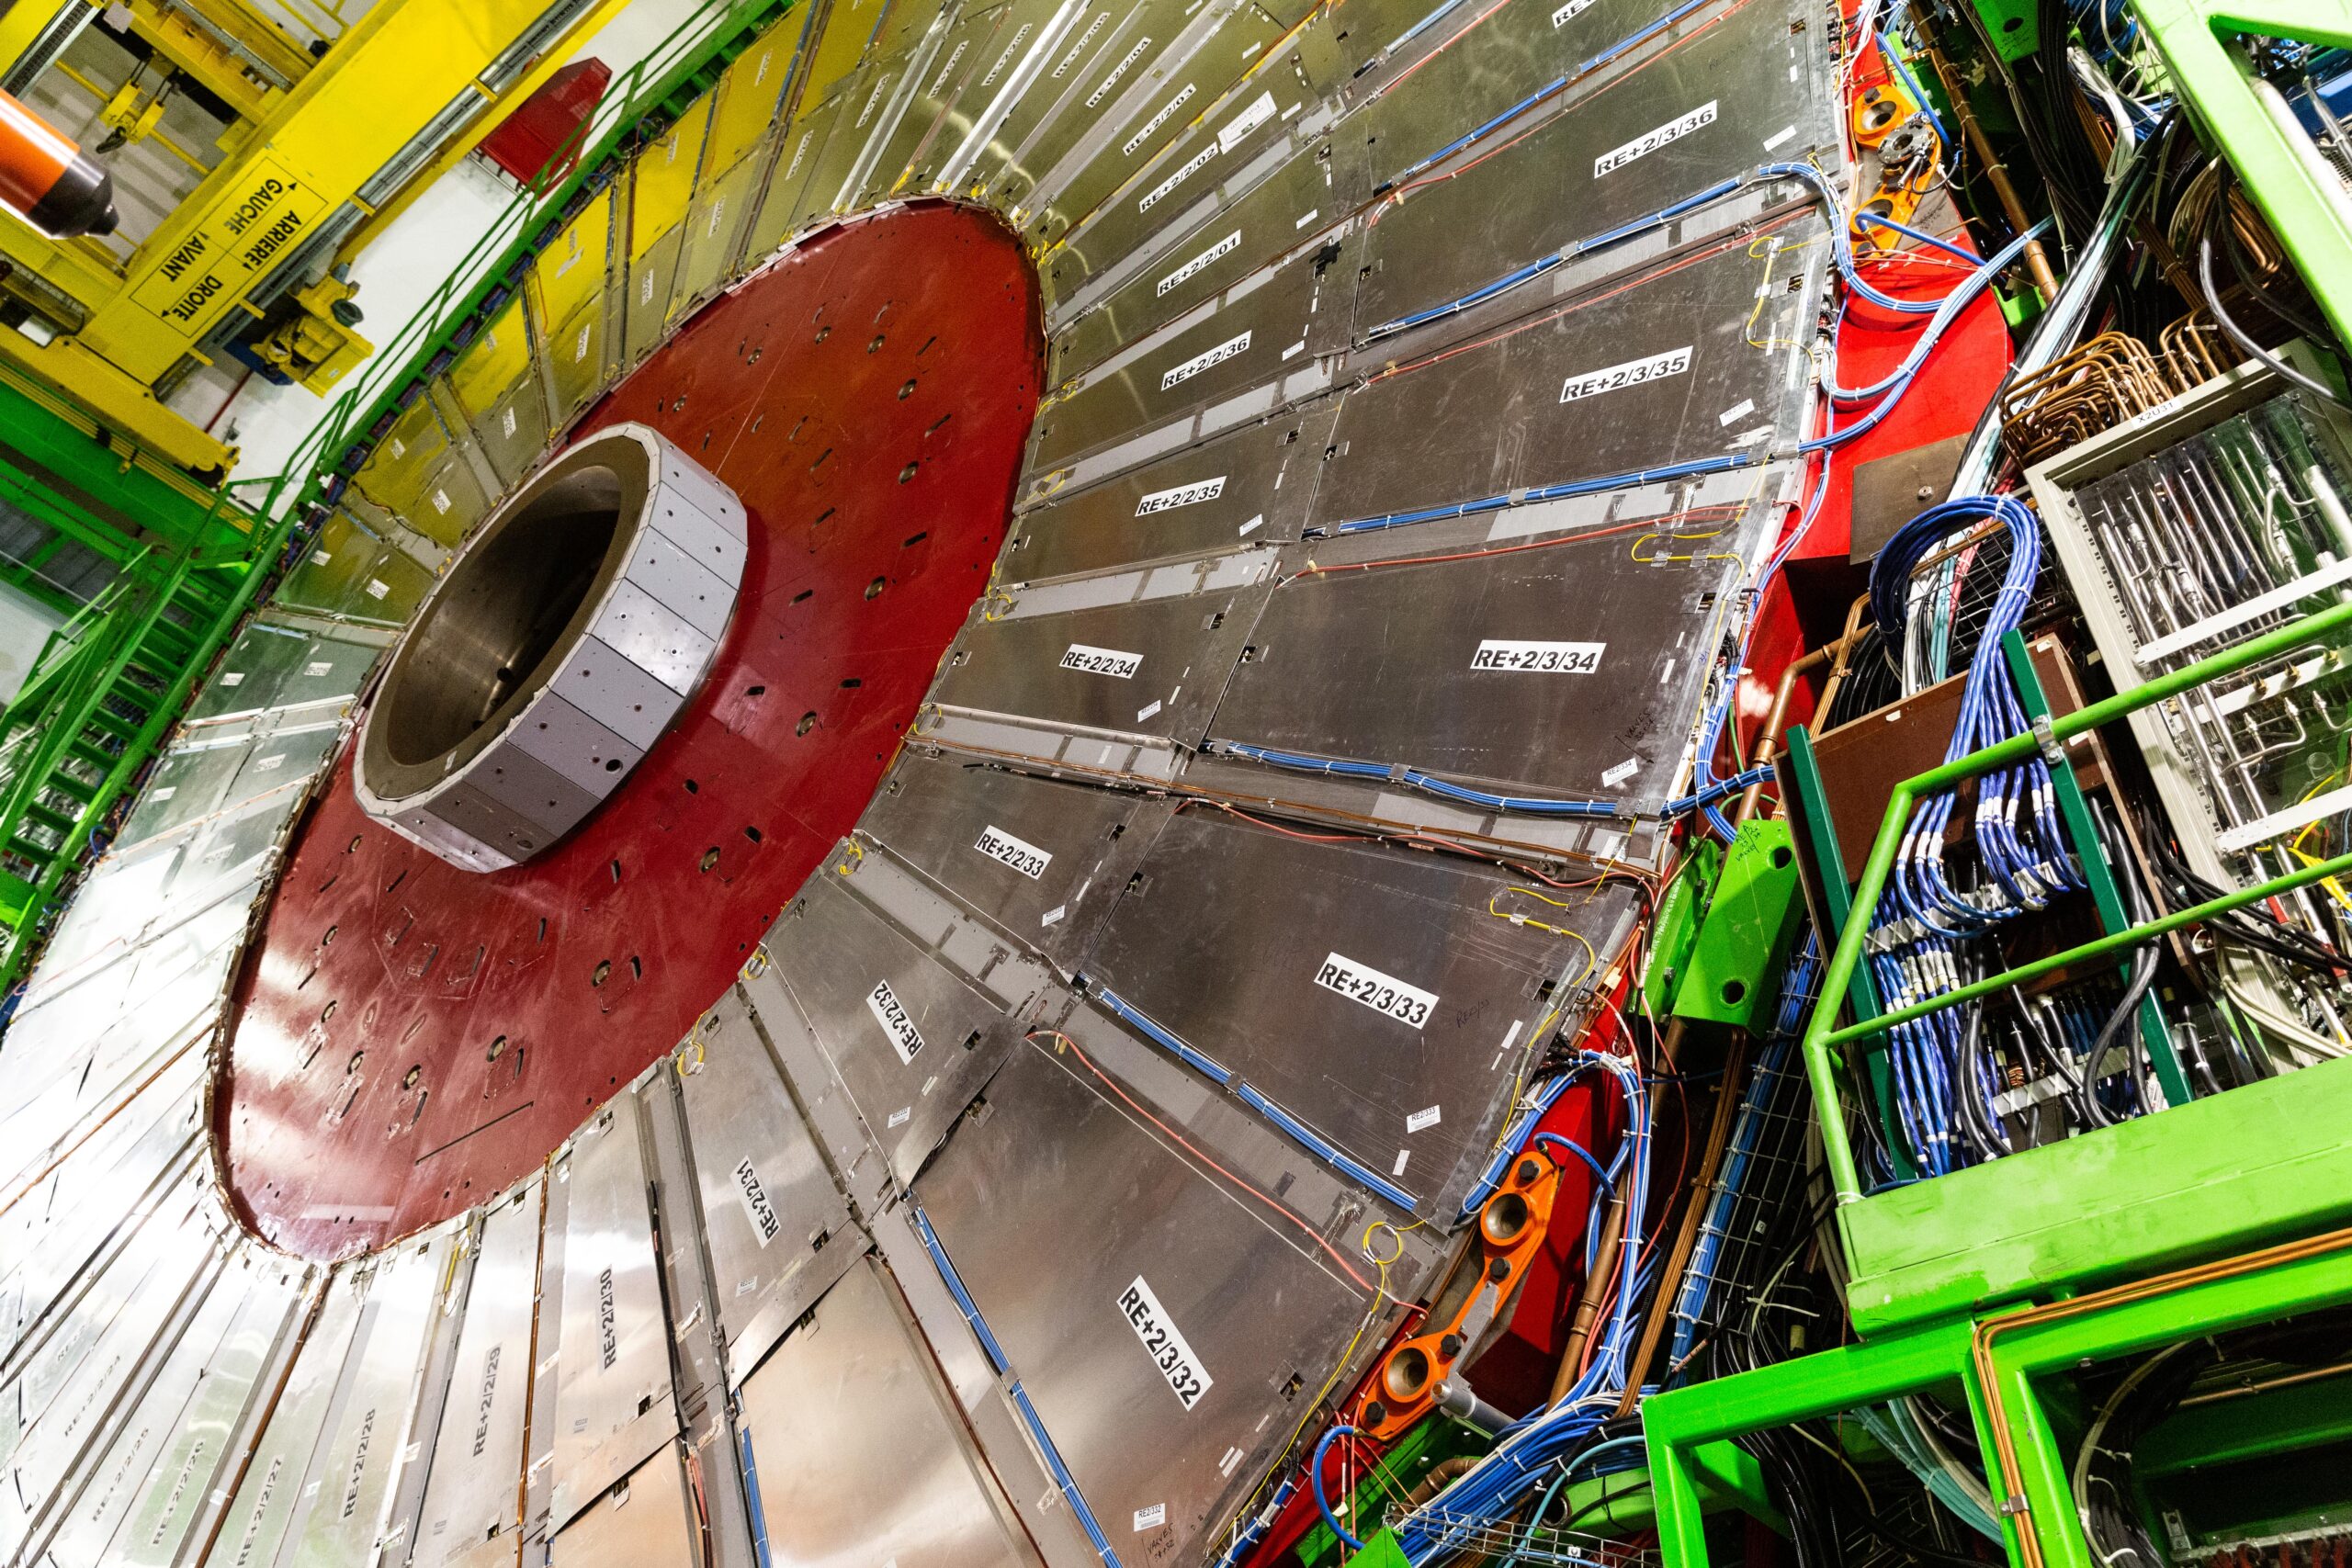 MEYRIN, SWITZERLAND - SEPTEMBER 14: A part of the 14.000 tone CMS detector is seen during the Open Days at the CERN particle physics research facility on September 14, 2019 in Meyrin, Switzerland. The 27km-long Large Hadron Collider is currently shut down for maintenance, which has created an opportunity to offer access to the public. CERN, the European Organization for Nuclear Research, is the world's largest laboratory for research into particle physics. (Photo by Ronald Patrick/Getty Images)